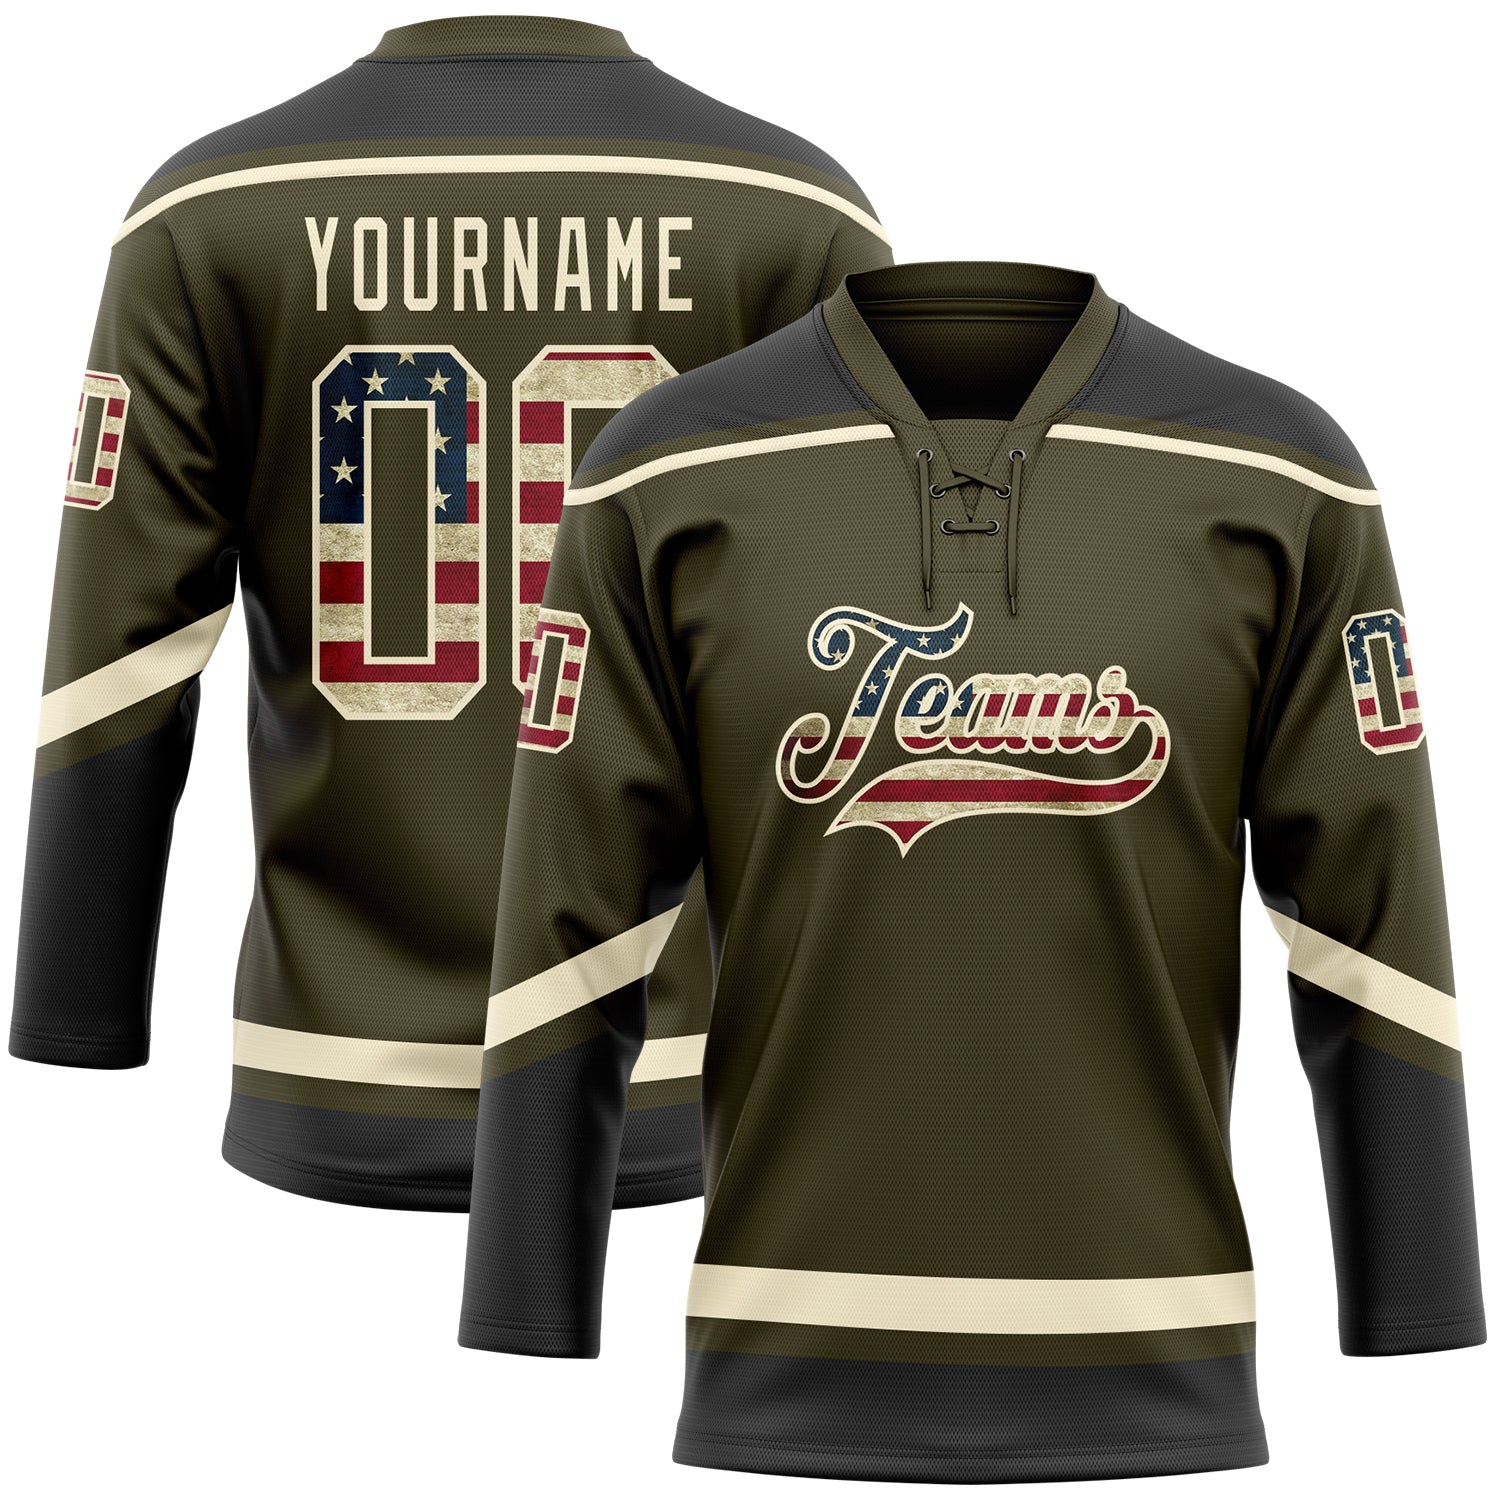 Classic Ice Hockey Jersey Personalized Custom Print Your Name